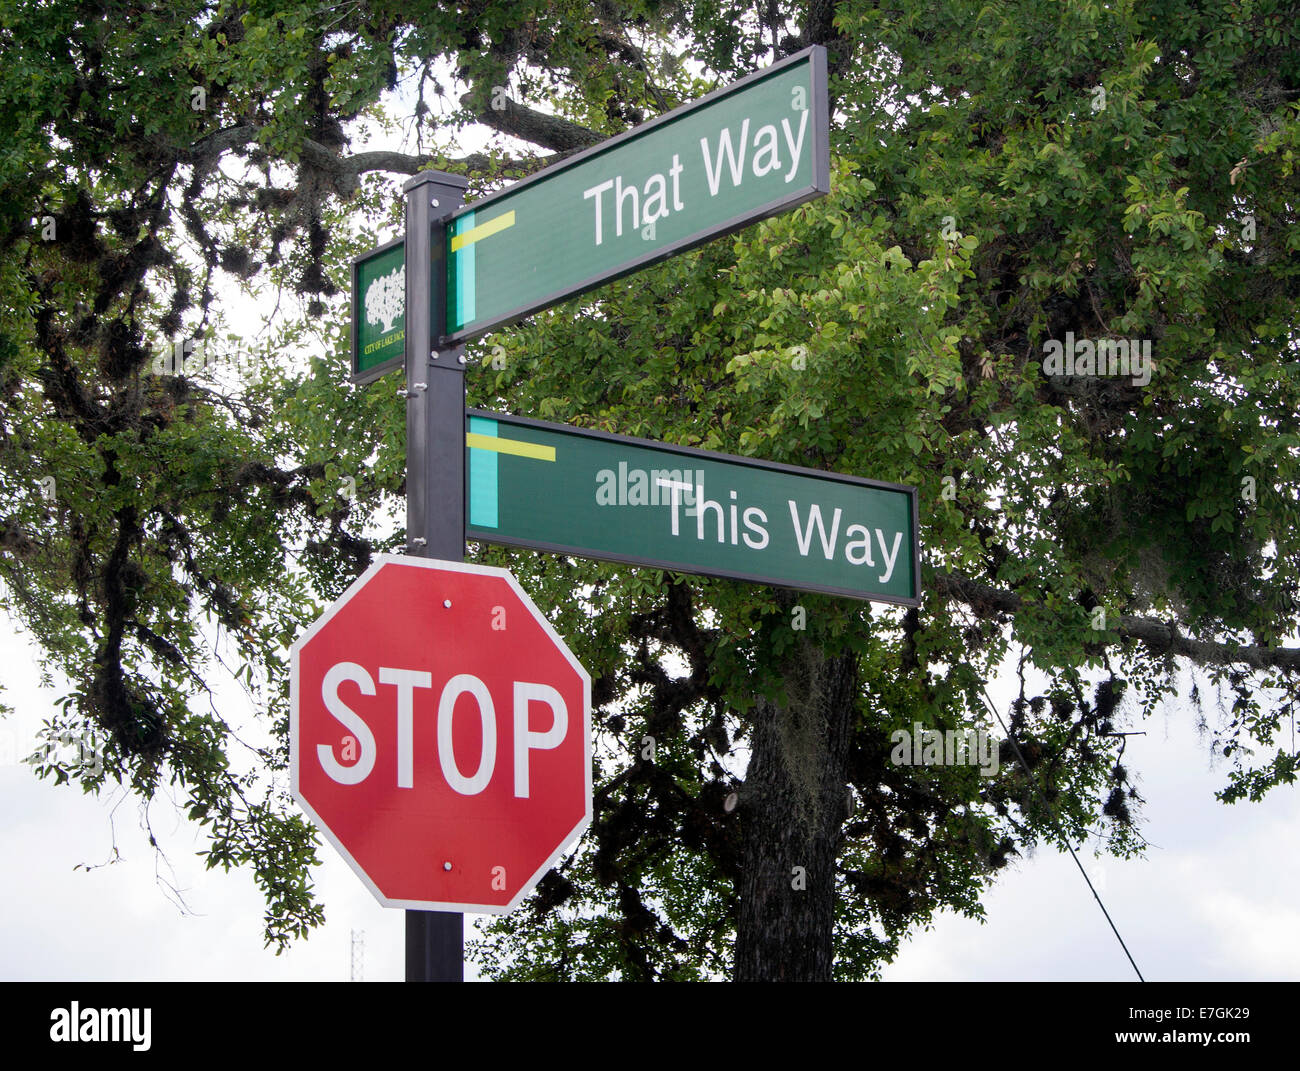 This Way That Way street signs in Lake Jackson Texas Stock Photo